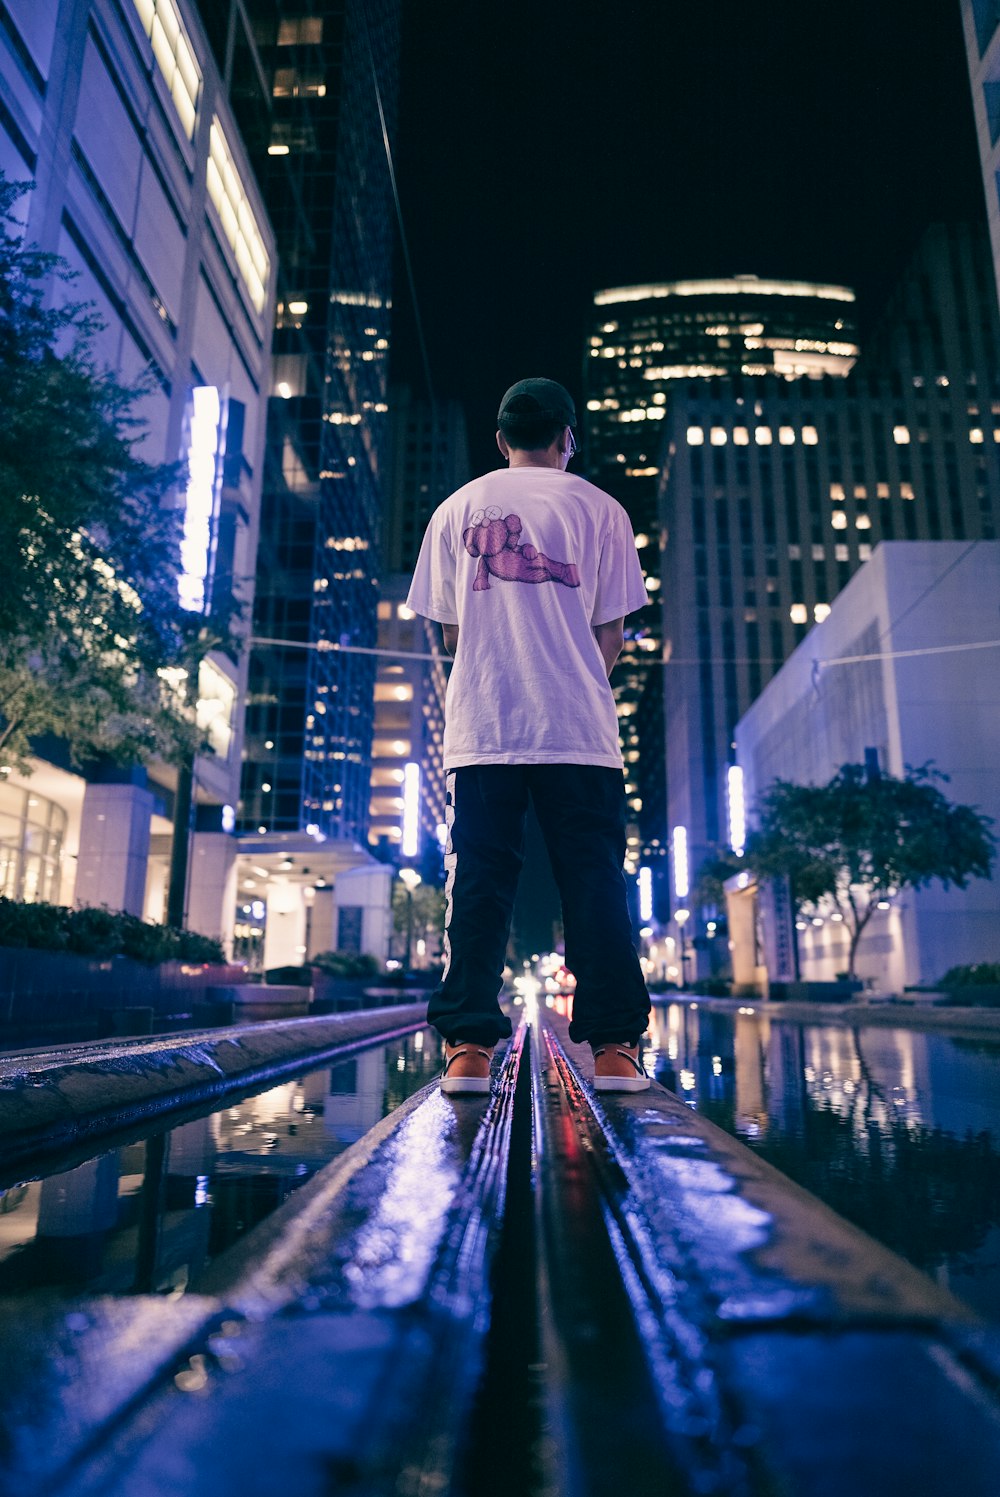 a skateboarder is standing in the middle of a city at night